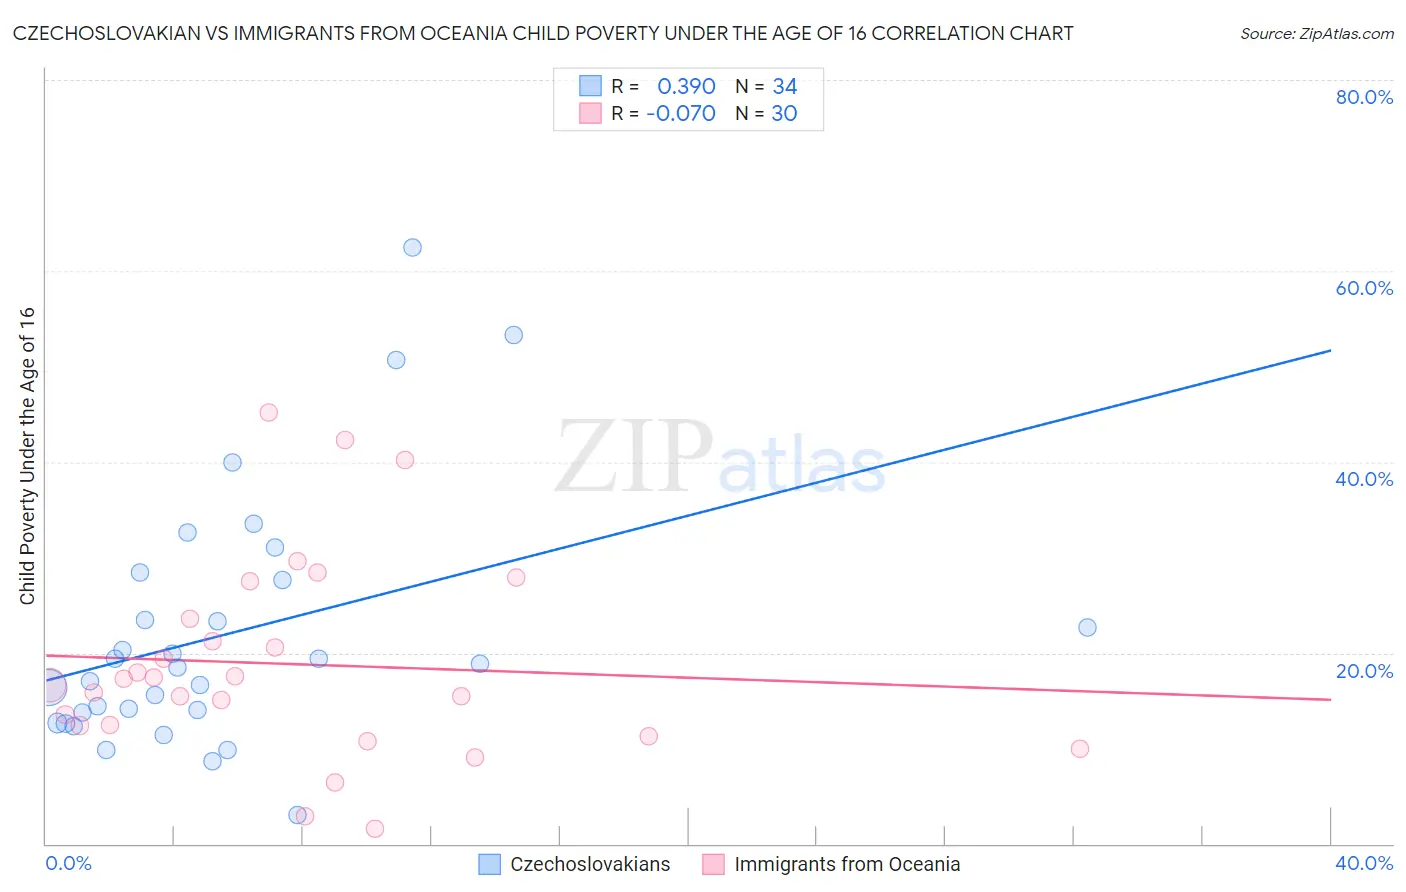 Czechoslovakian vs Immigrants from Oceania Child Poverty Under the Age of 16